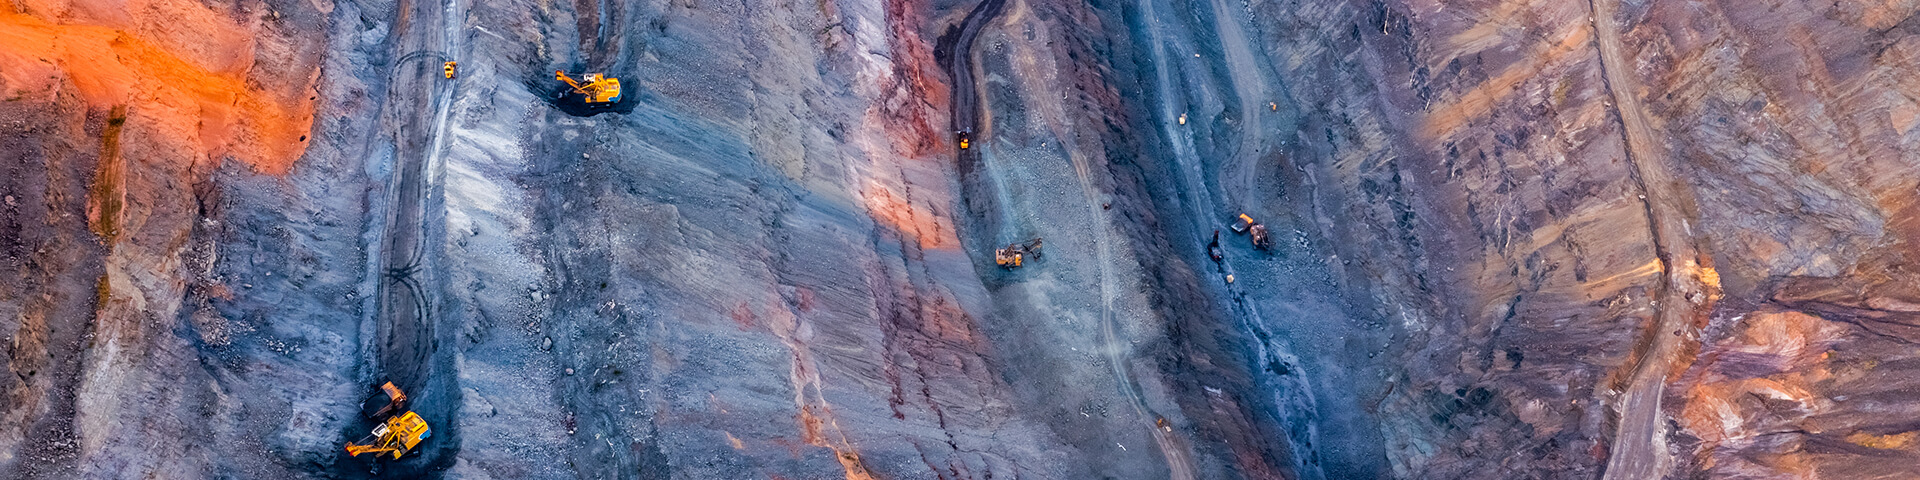 aerial-view-of-an-open-pit-of-iron-ore-resource-m-2021-09-11-07-39-47-utc (1)